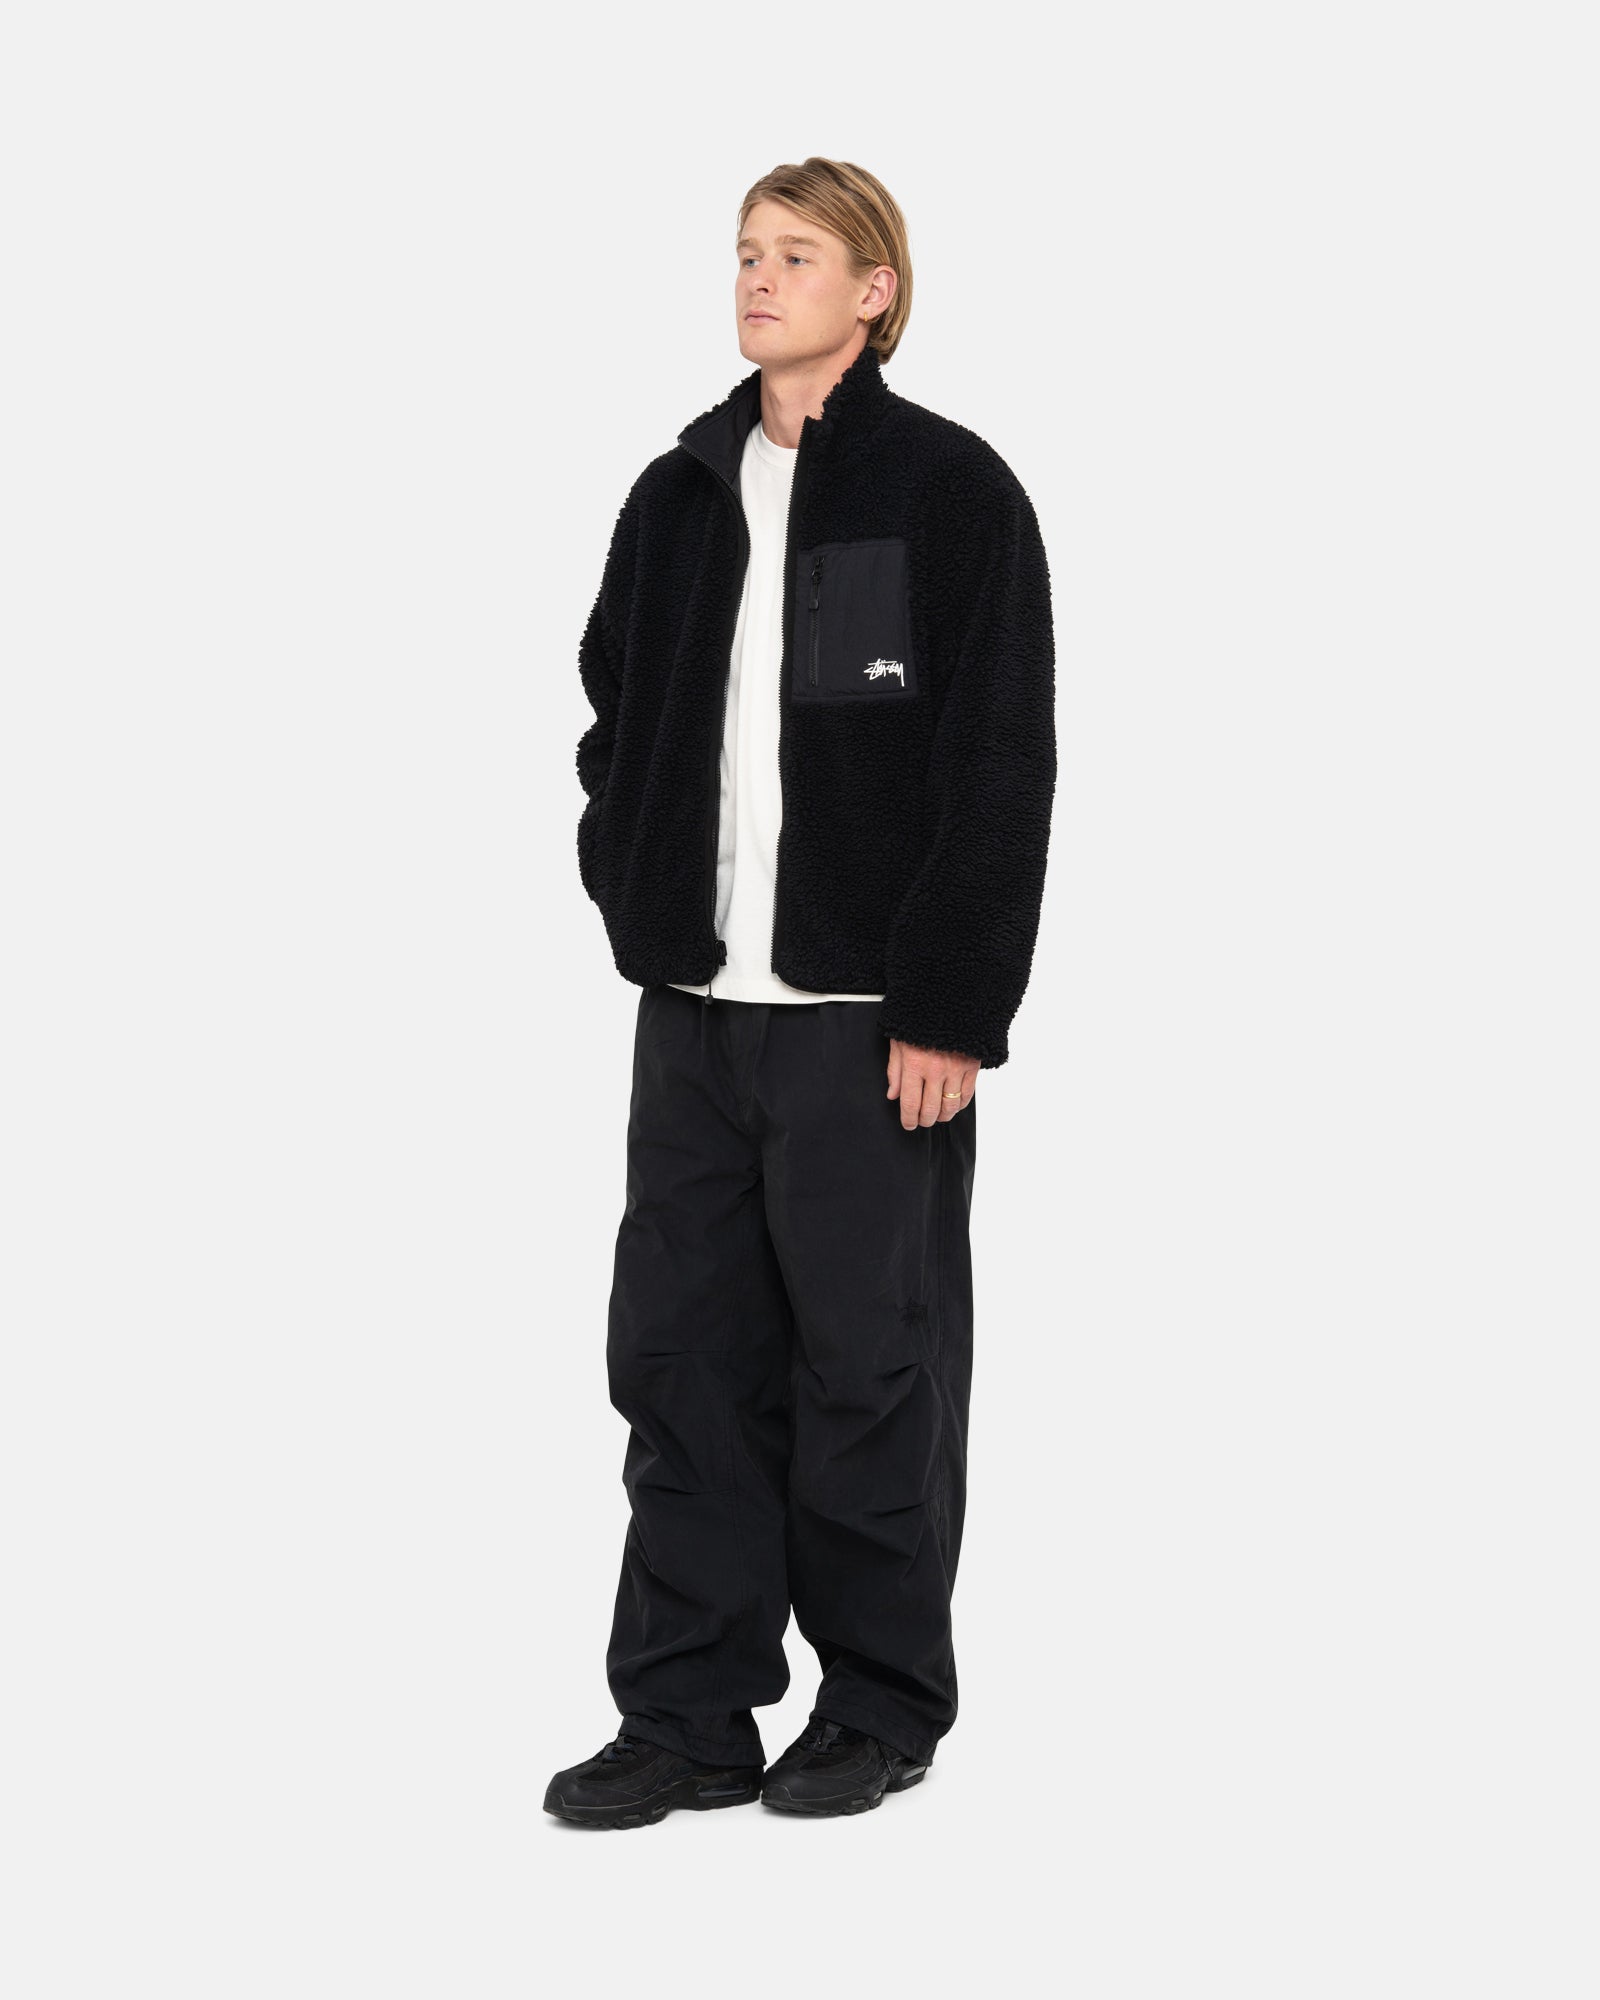 stussystussy nyco over trousers XS black